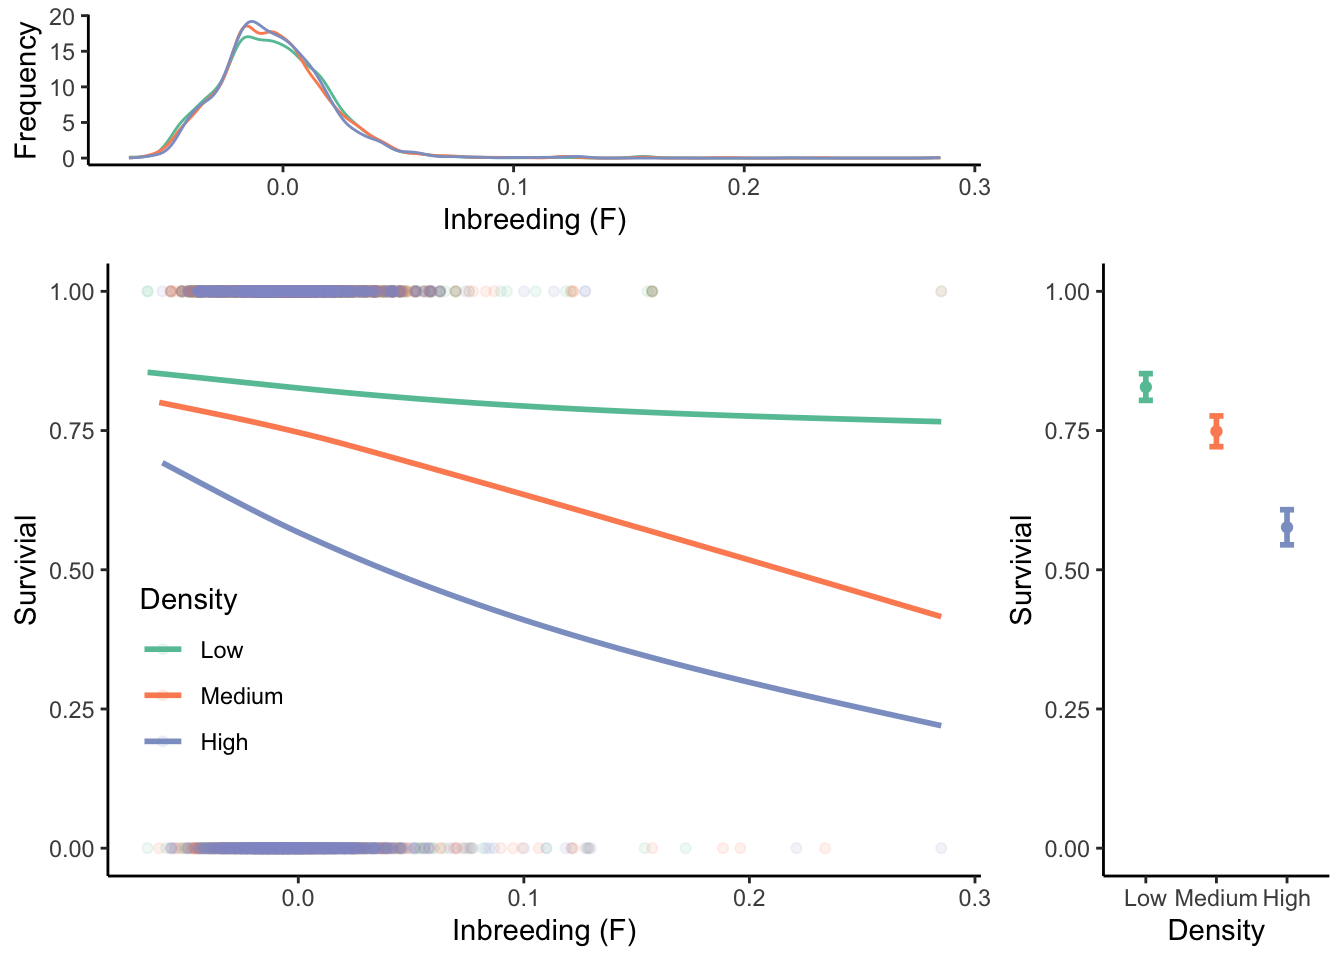 Relationship between inbreeding and survival in a feral population of Soay sheep. Survival of sheep is strongly density dependent, as indicated by the lower average survival of individuals at medium and high densities (right graph). Genetic analyses also revealed low to moderate levels of inbreeding, as estimated by a multi-locus coefficient of inbreeding [see Equation (6.14)] (top graph). Finally, survival at medium and high densities depends on the degree of inbreeding (left graph).  [Data](data/6_inbreeding.csv) from Pemberton et al. (2017).